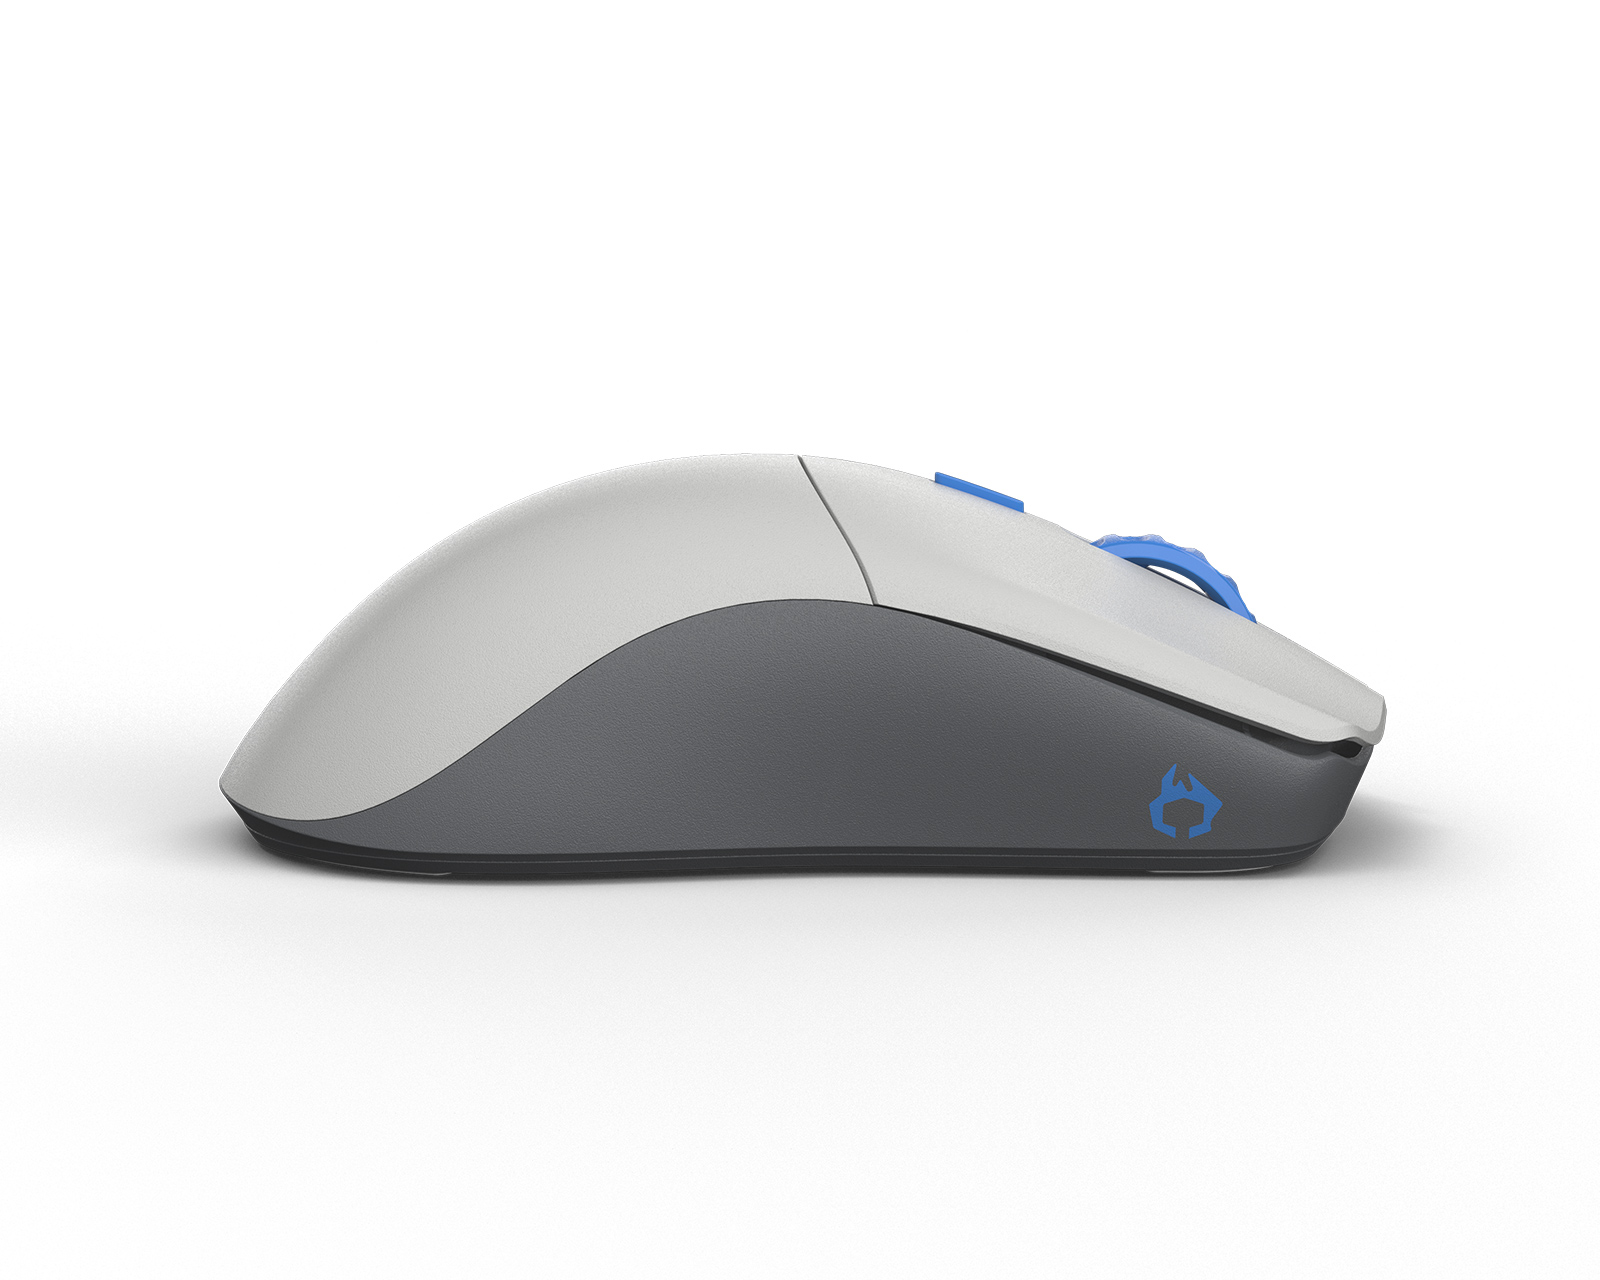 Glorious Series One Pro Wireless Gaming Mouse - Vidar - Forge